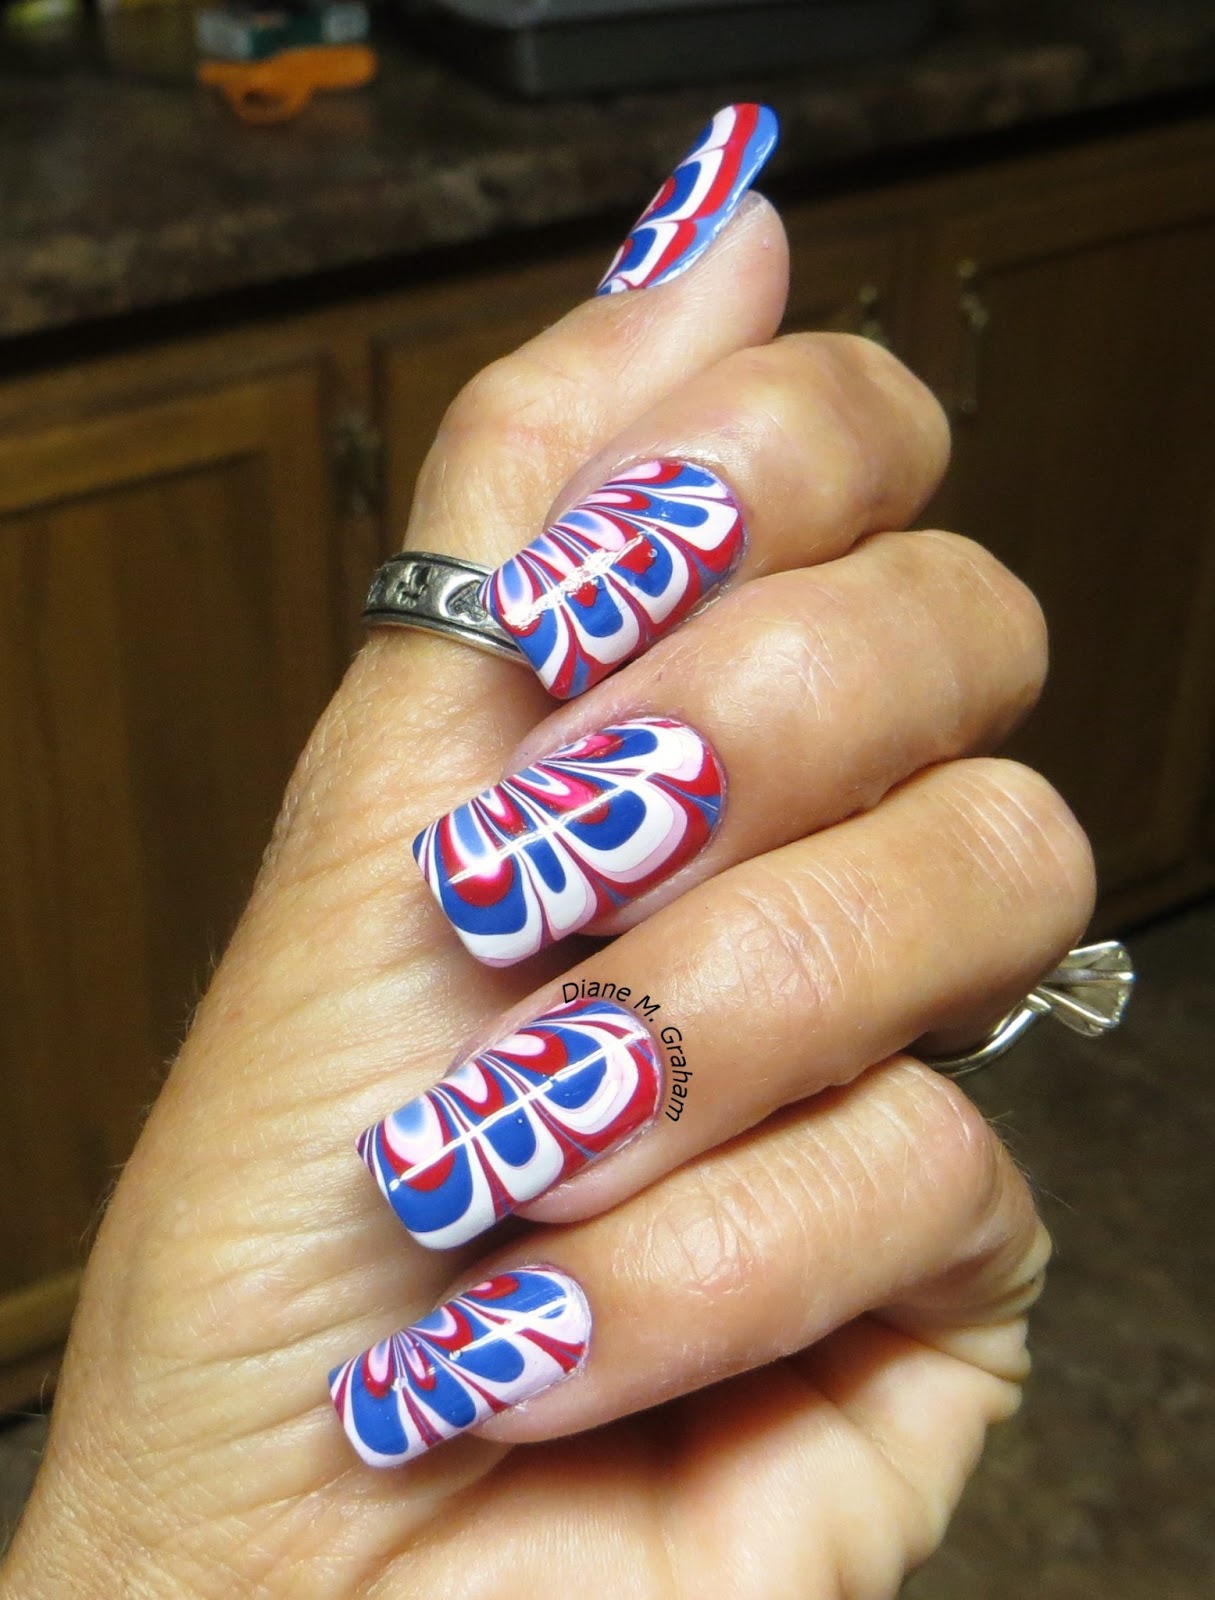 Make a Statement with 4th of July Nail Art Designs